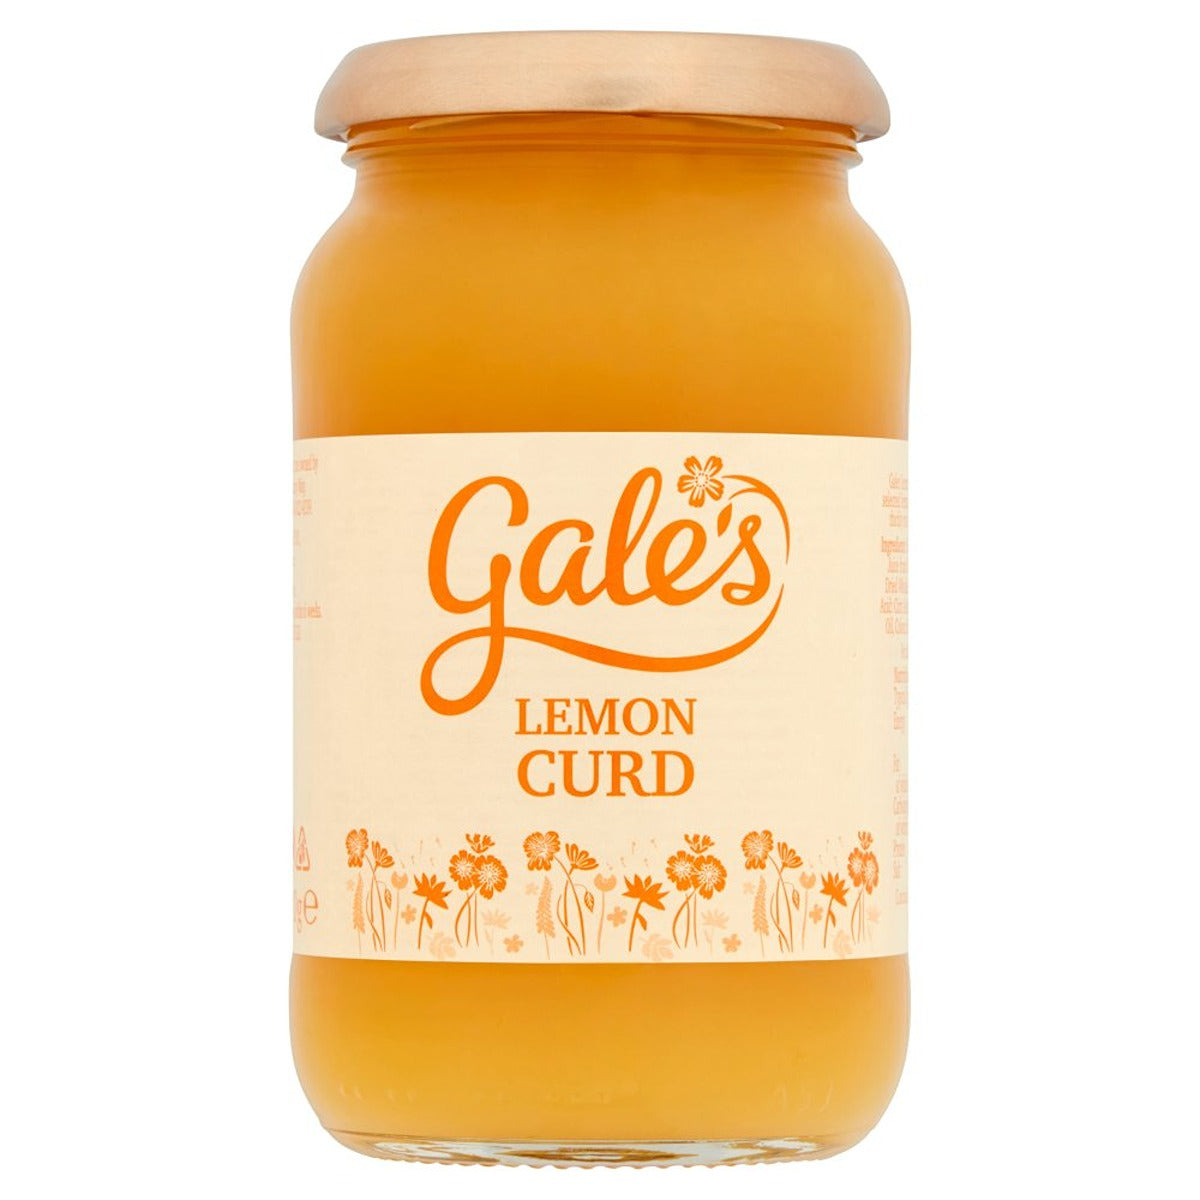 Gale's - Lemon Curd - 410g - Continental Food Store